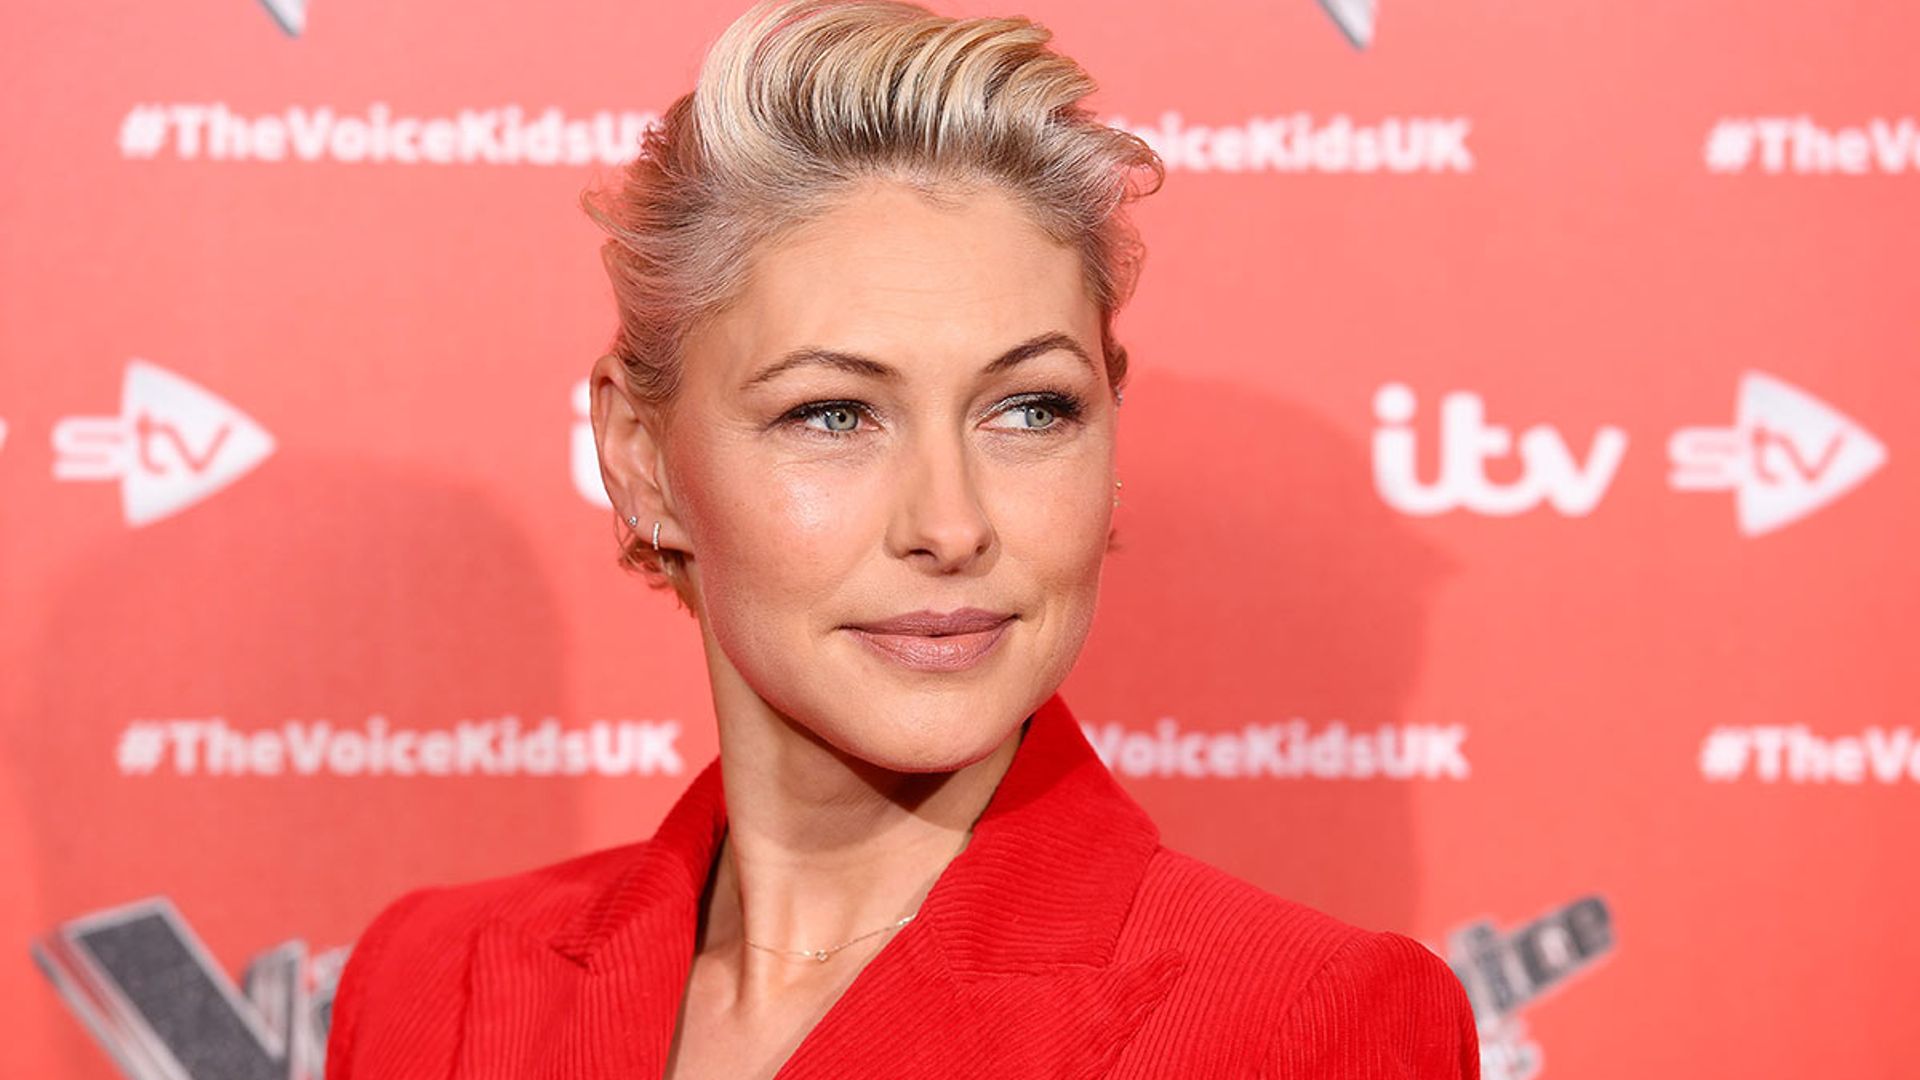 Emma Willis just shaved her head - watch the video!